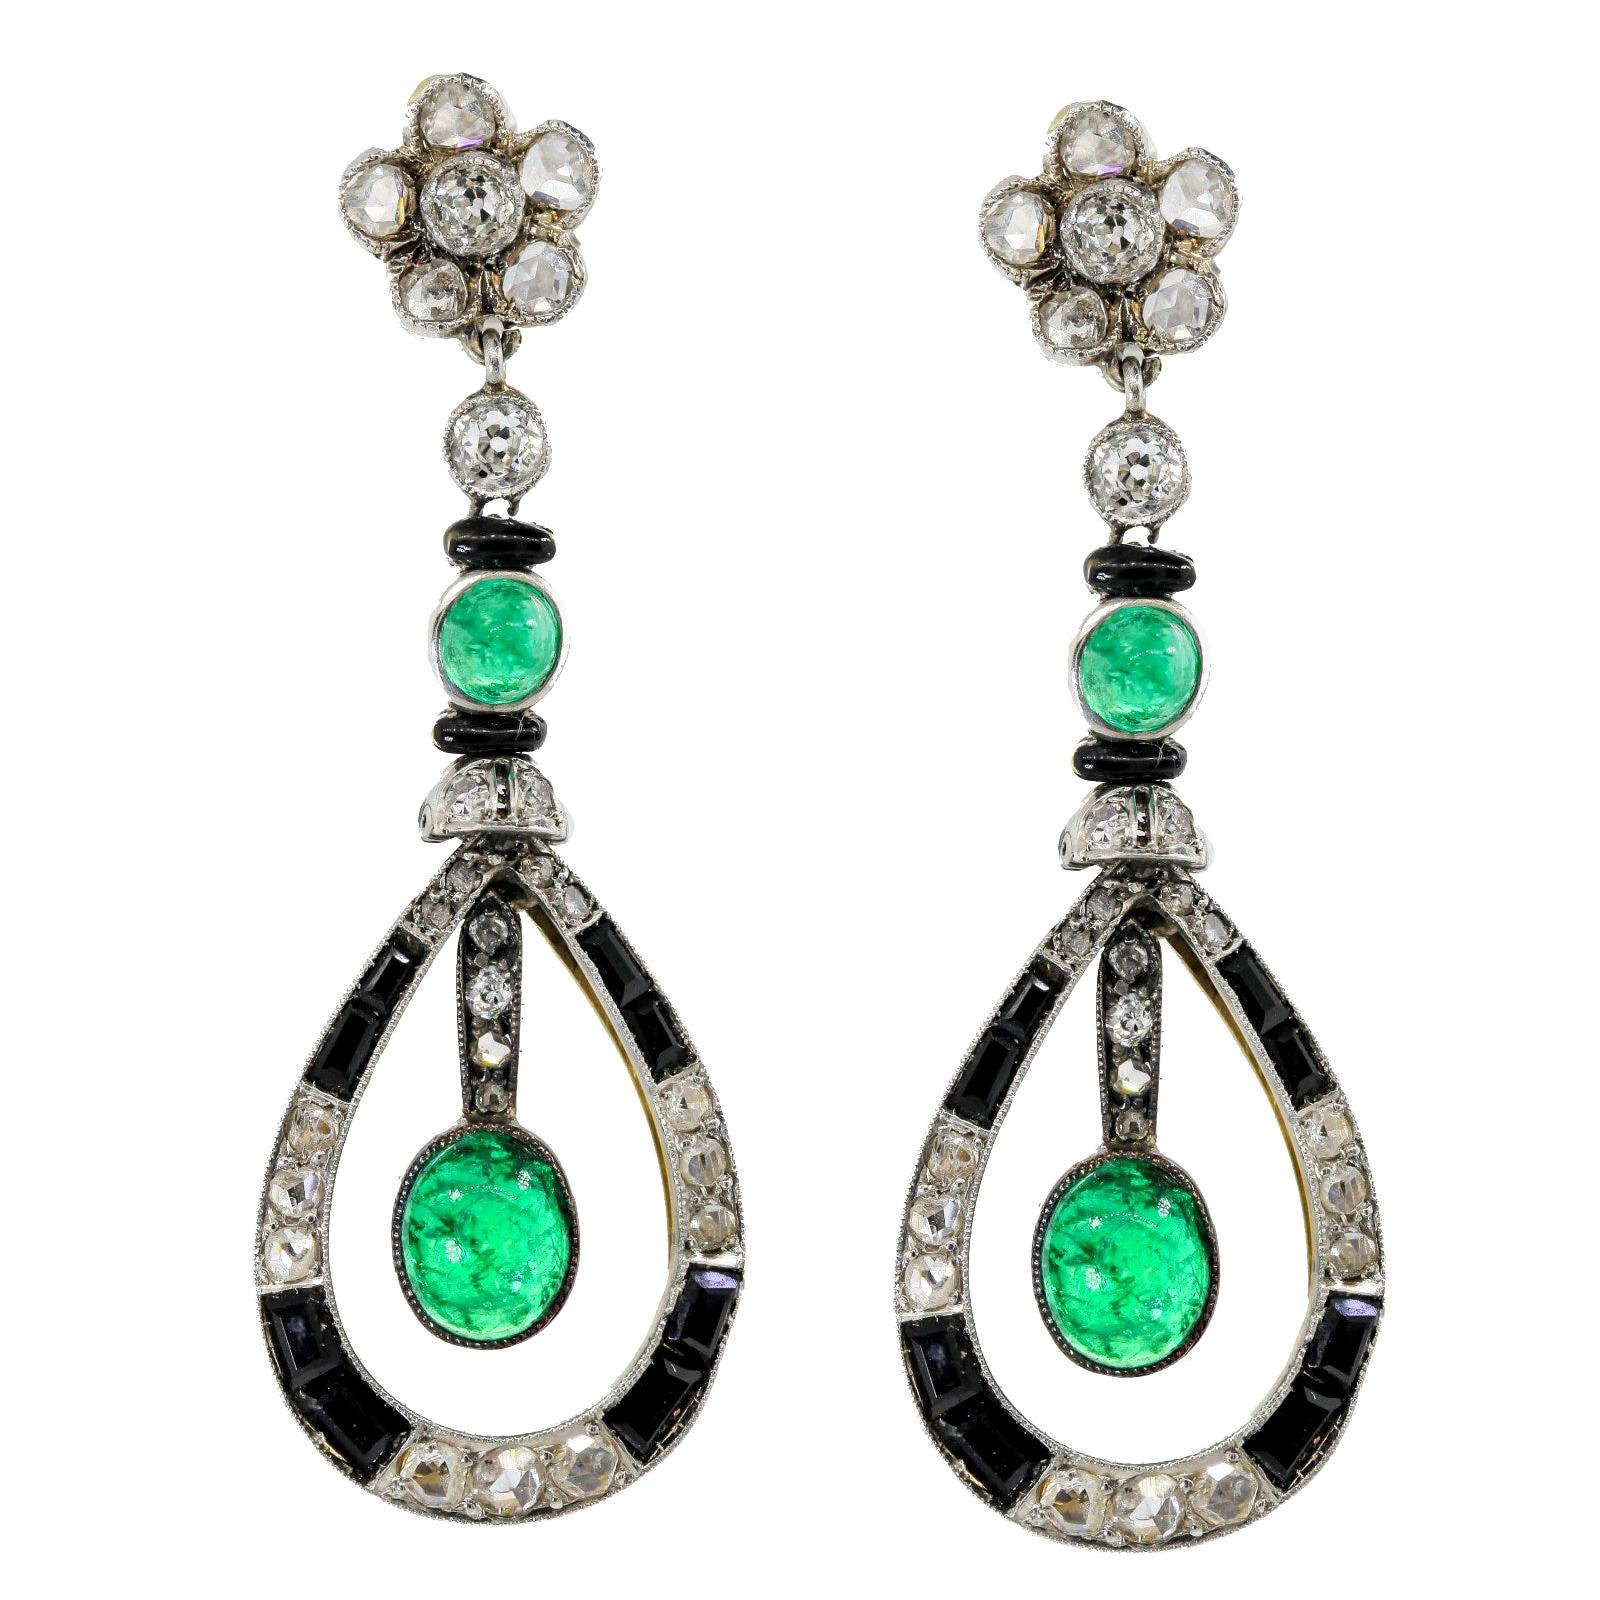 Antique Emerald Onyx and Old Cut Diamonds Earrings